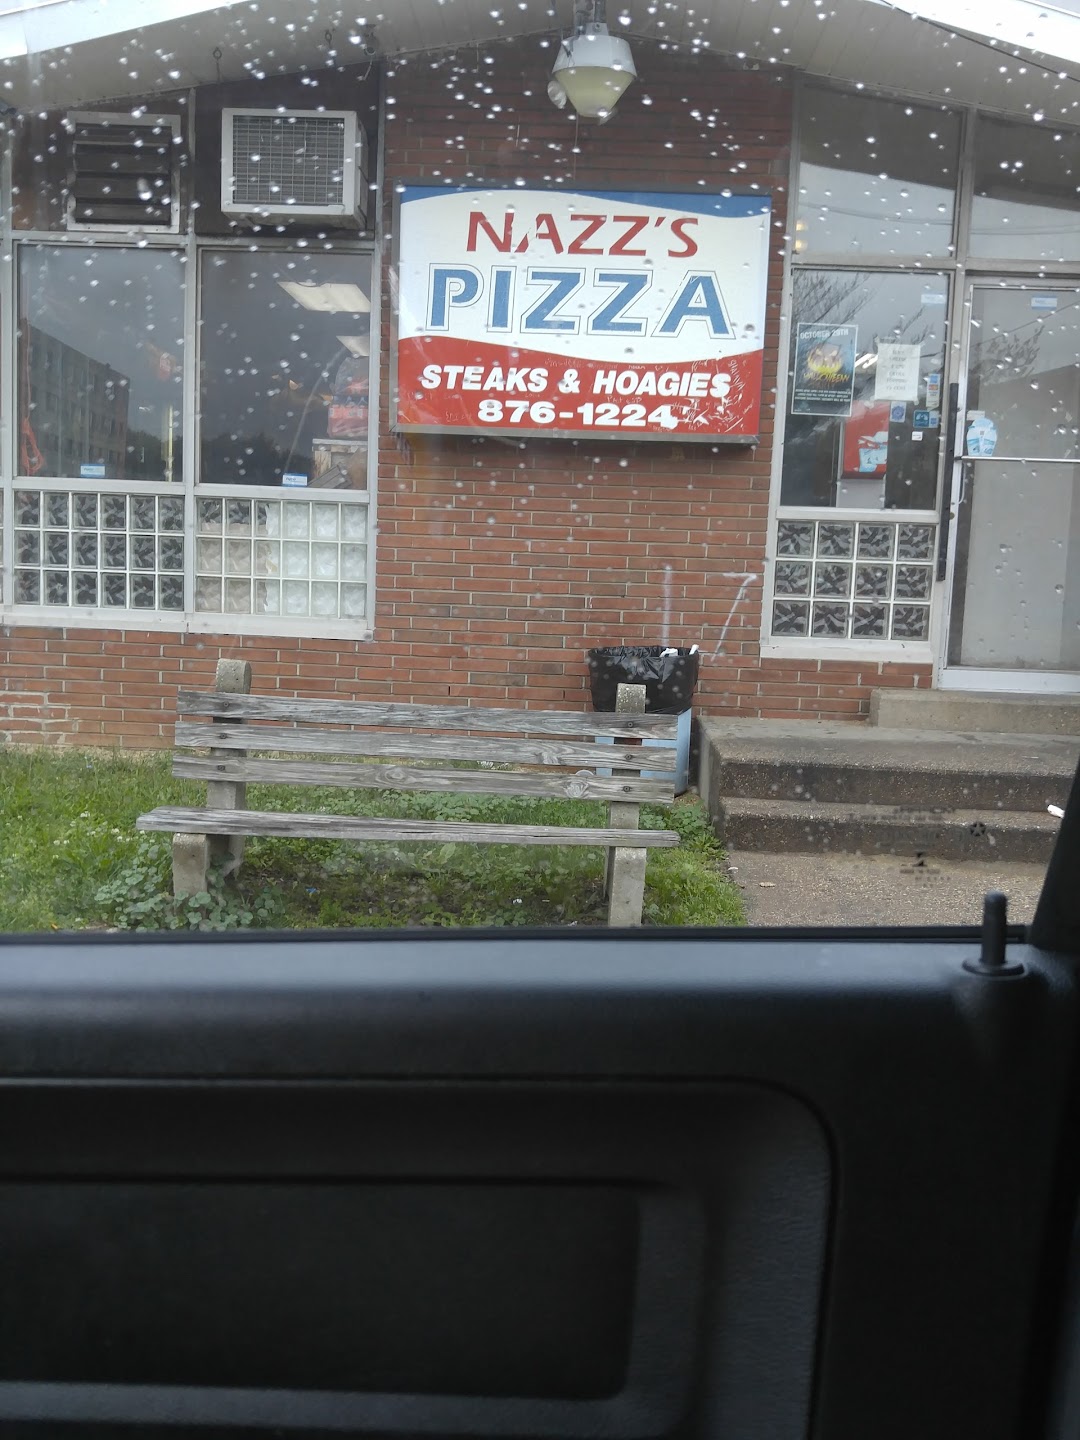 Nazzs Pizza